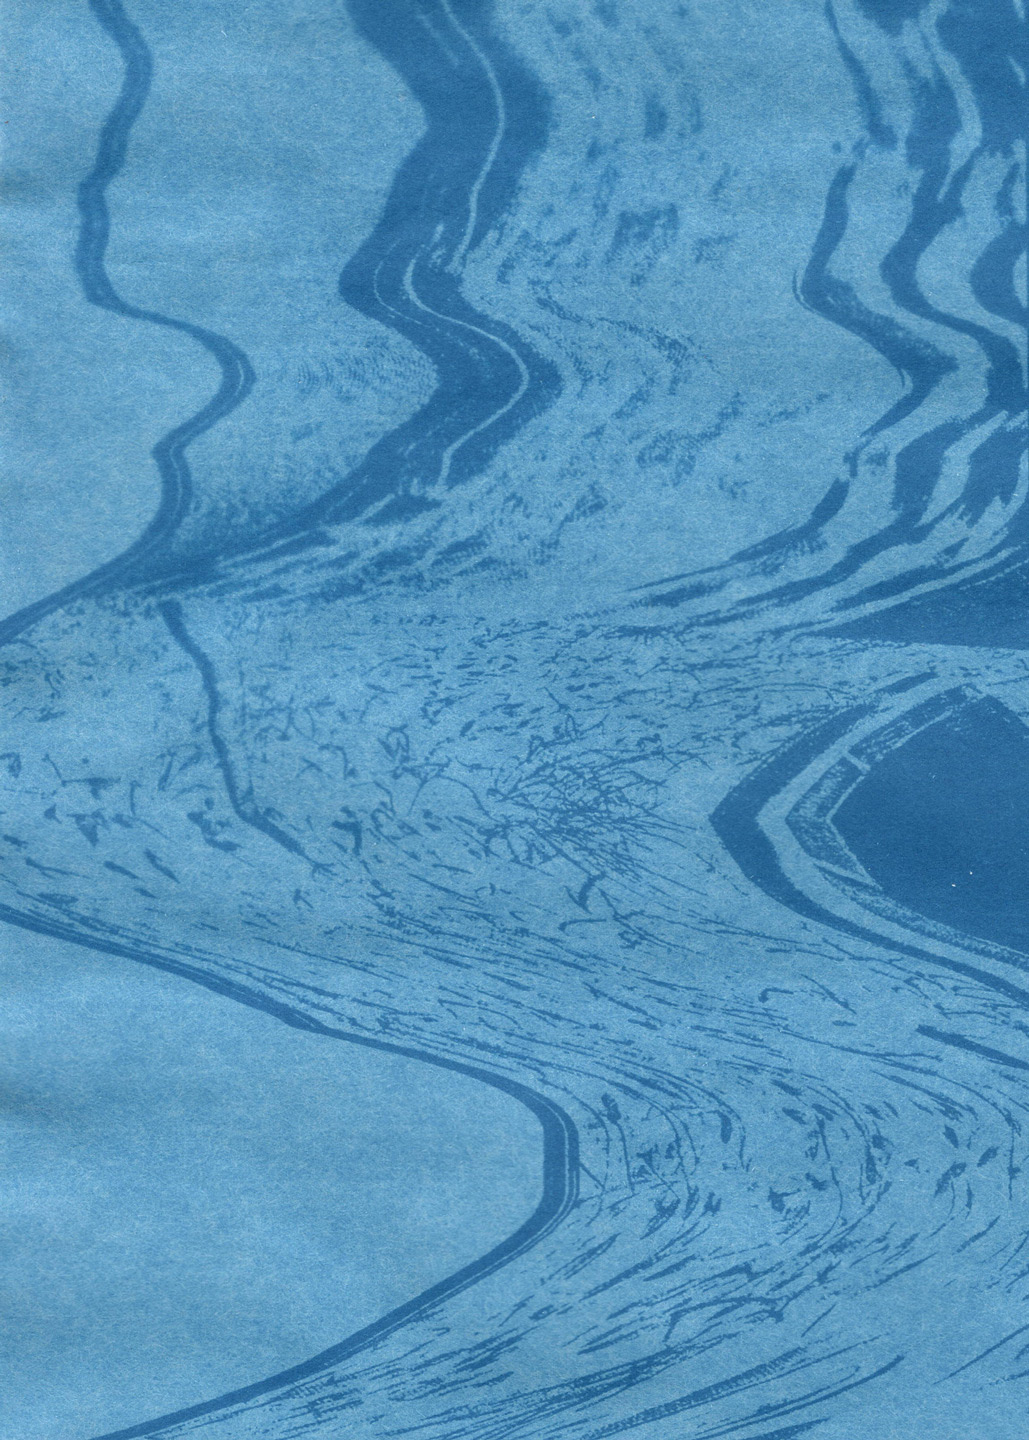 A cyanotype created from the Nature/Distortion scanograph piece. The light blue background and dark blue organic shapes and elements create a serene feel, linking with flowing water and nature. 